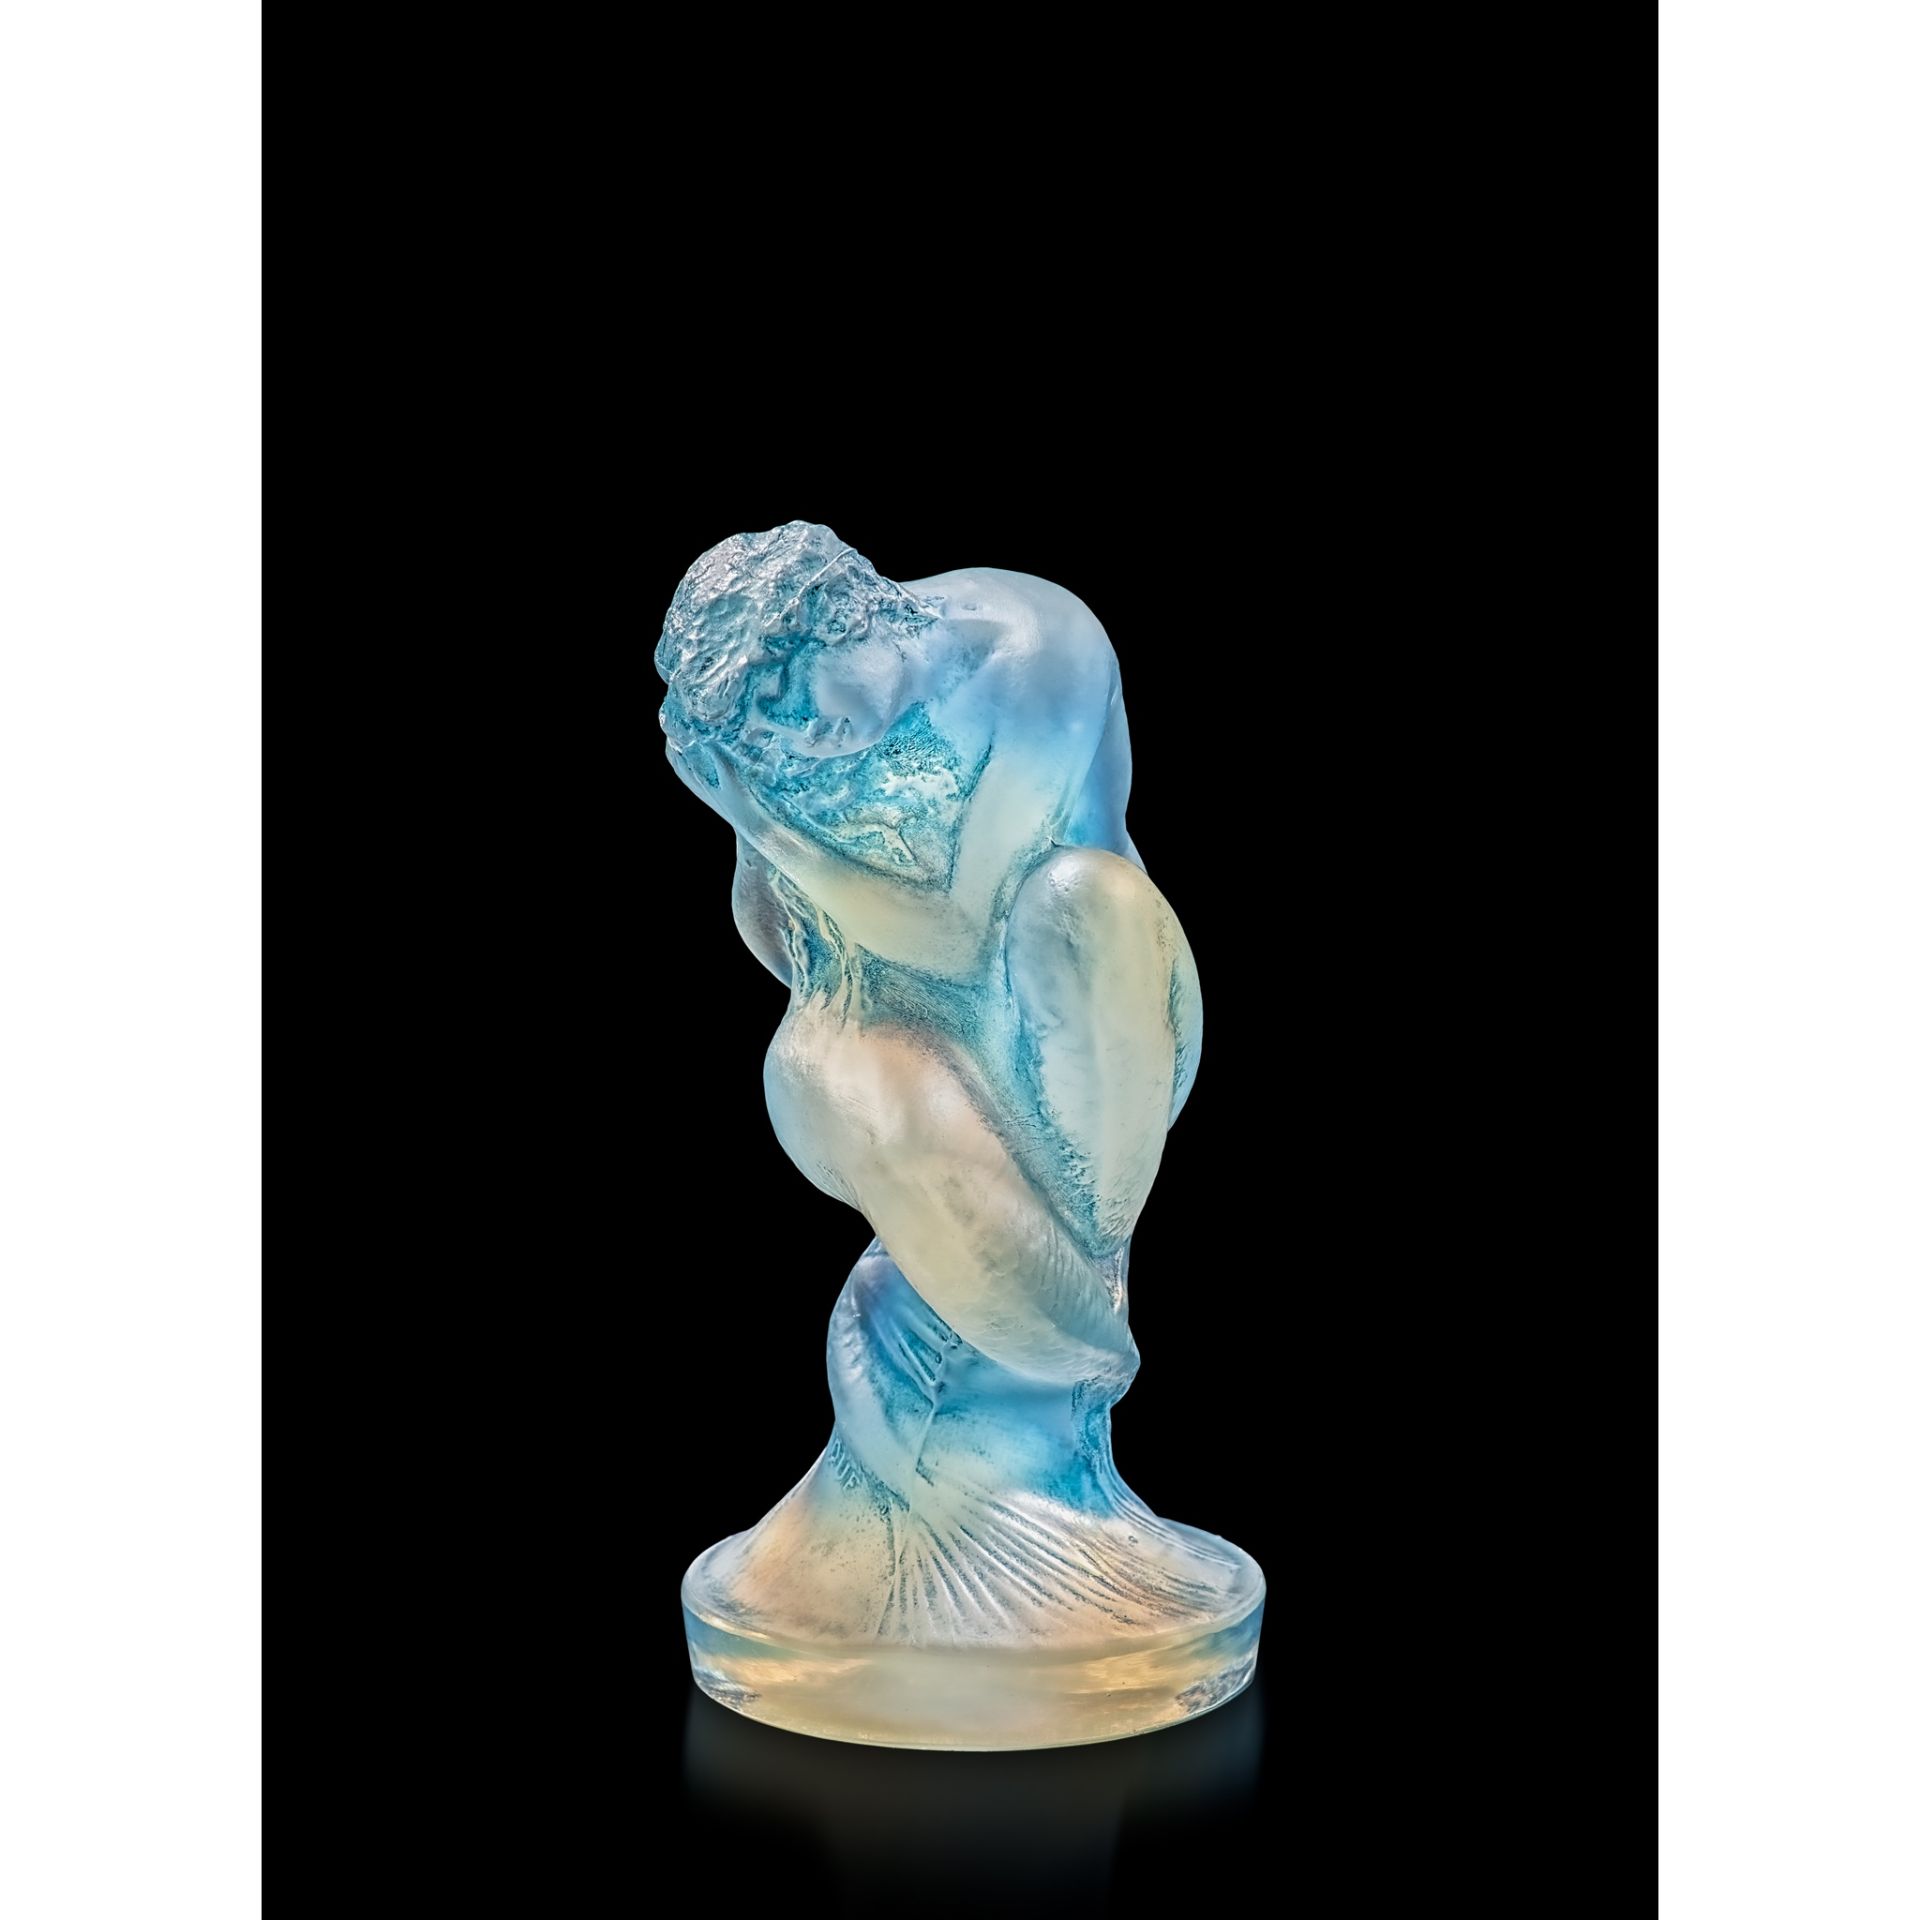 René Lalique (French 1860-1945) SIRÈNE PAPERWEIGHT, NO. 831